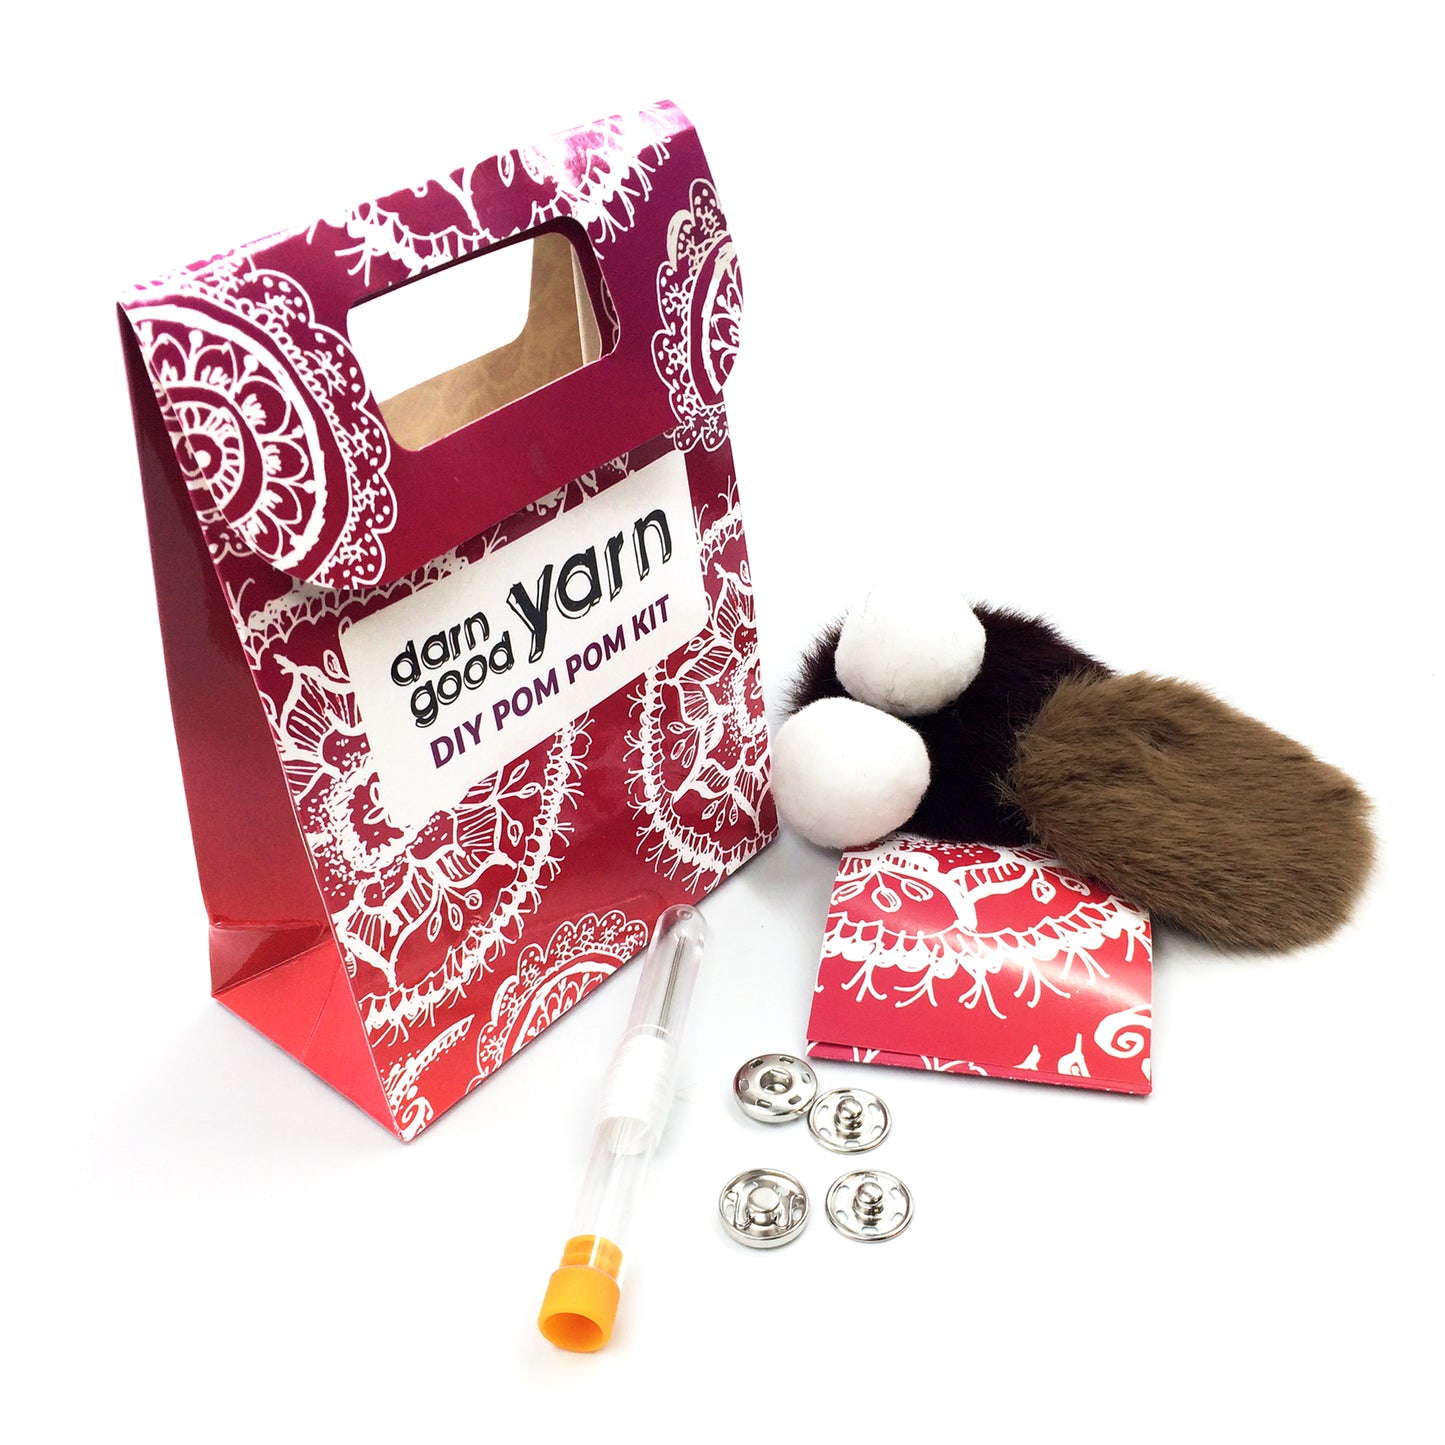 DIY Pom pom kit with all items showing in front of a white background.